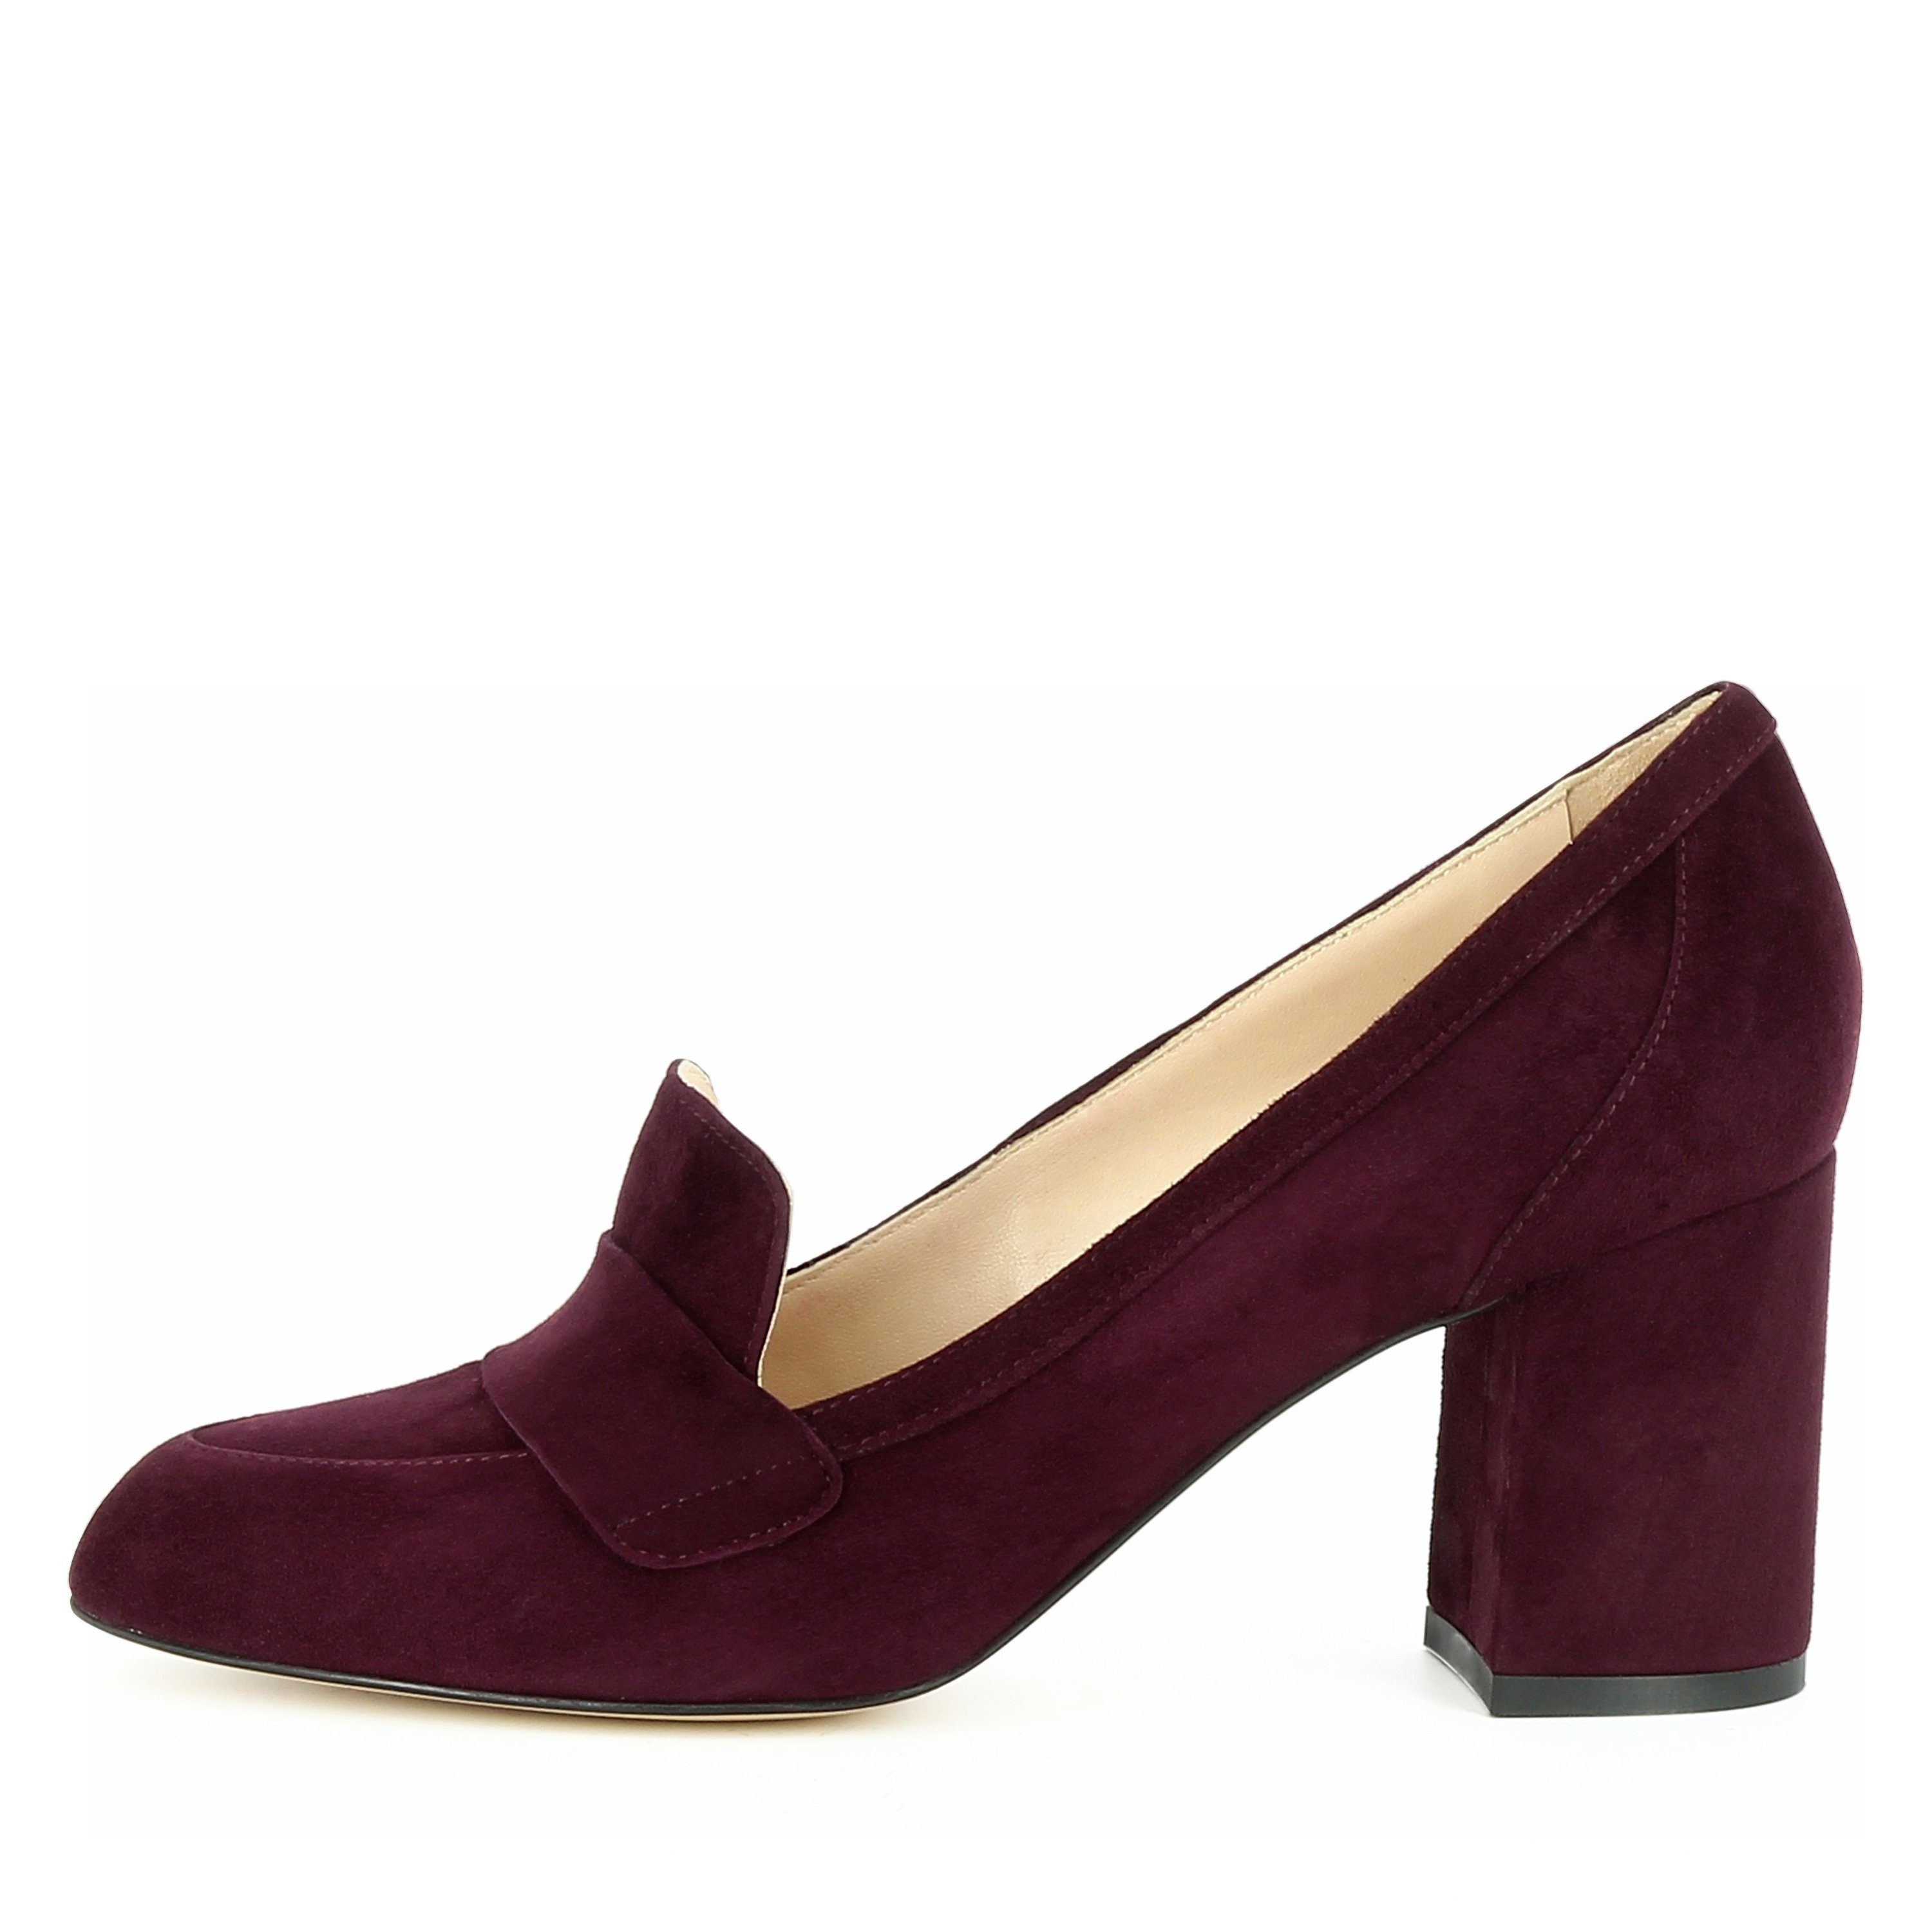 Evita NELLY Pumps bordeaux Italy in Handmade